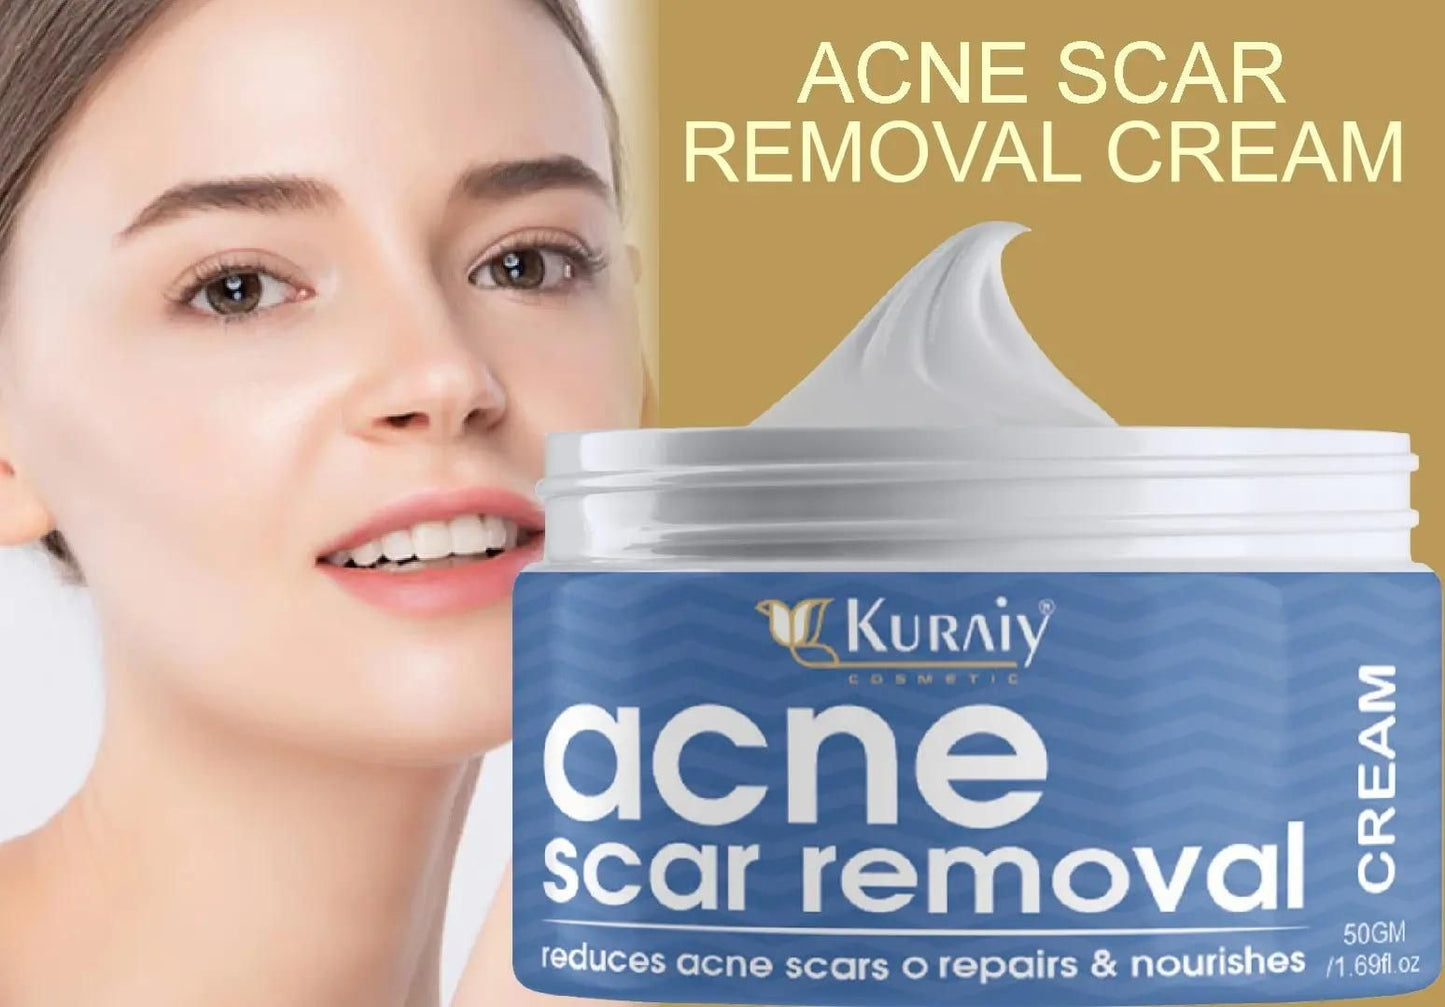 KURAI Scar Removal Cream Gel Remove Acne Spots Treatment Stretch Marks Burn Surgical Scar Repair Cream Smoothing Whitening Skin Beauty